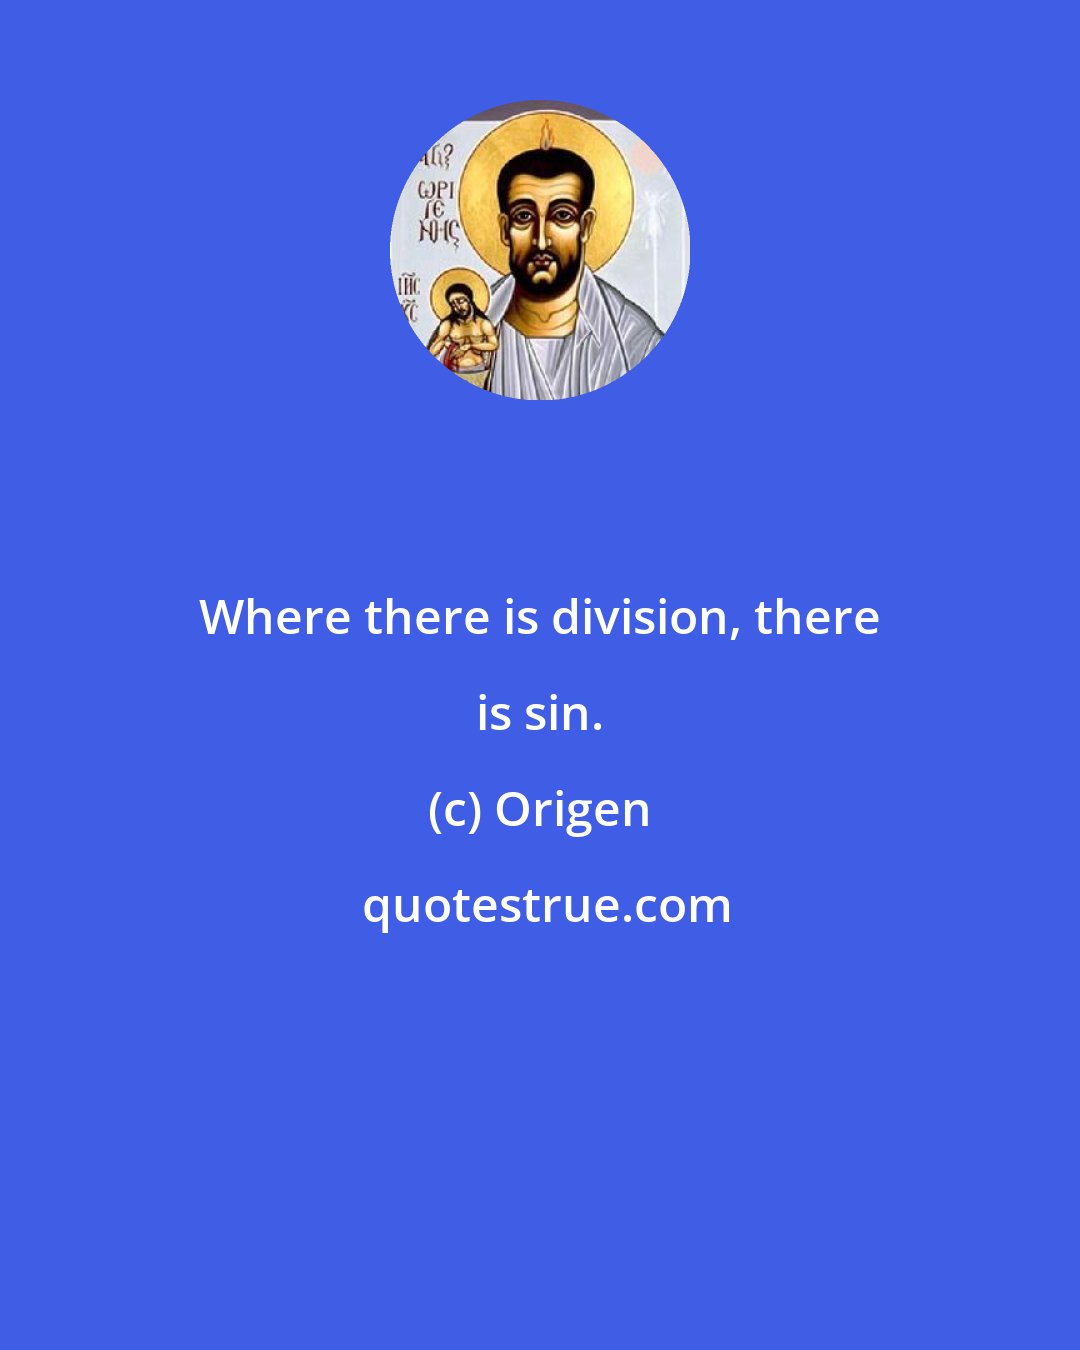 Origen: Where there is division, there is sin.